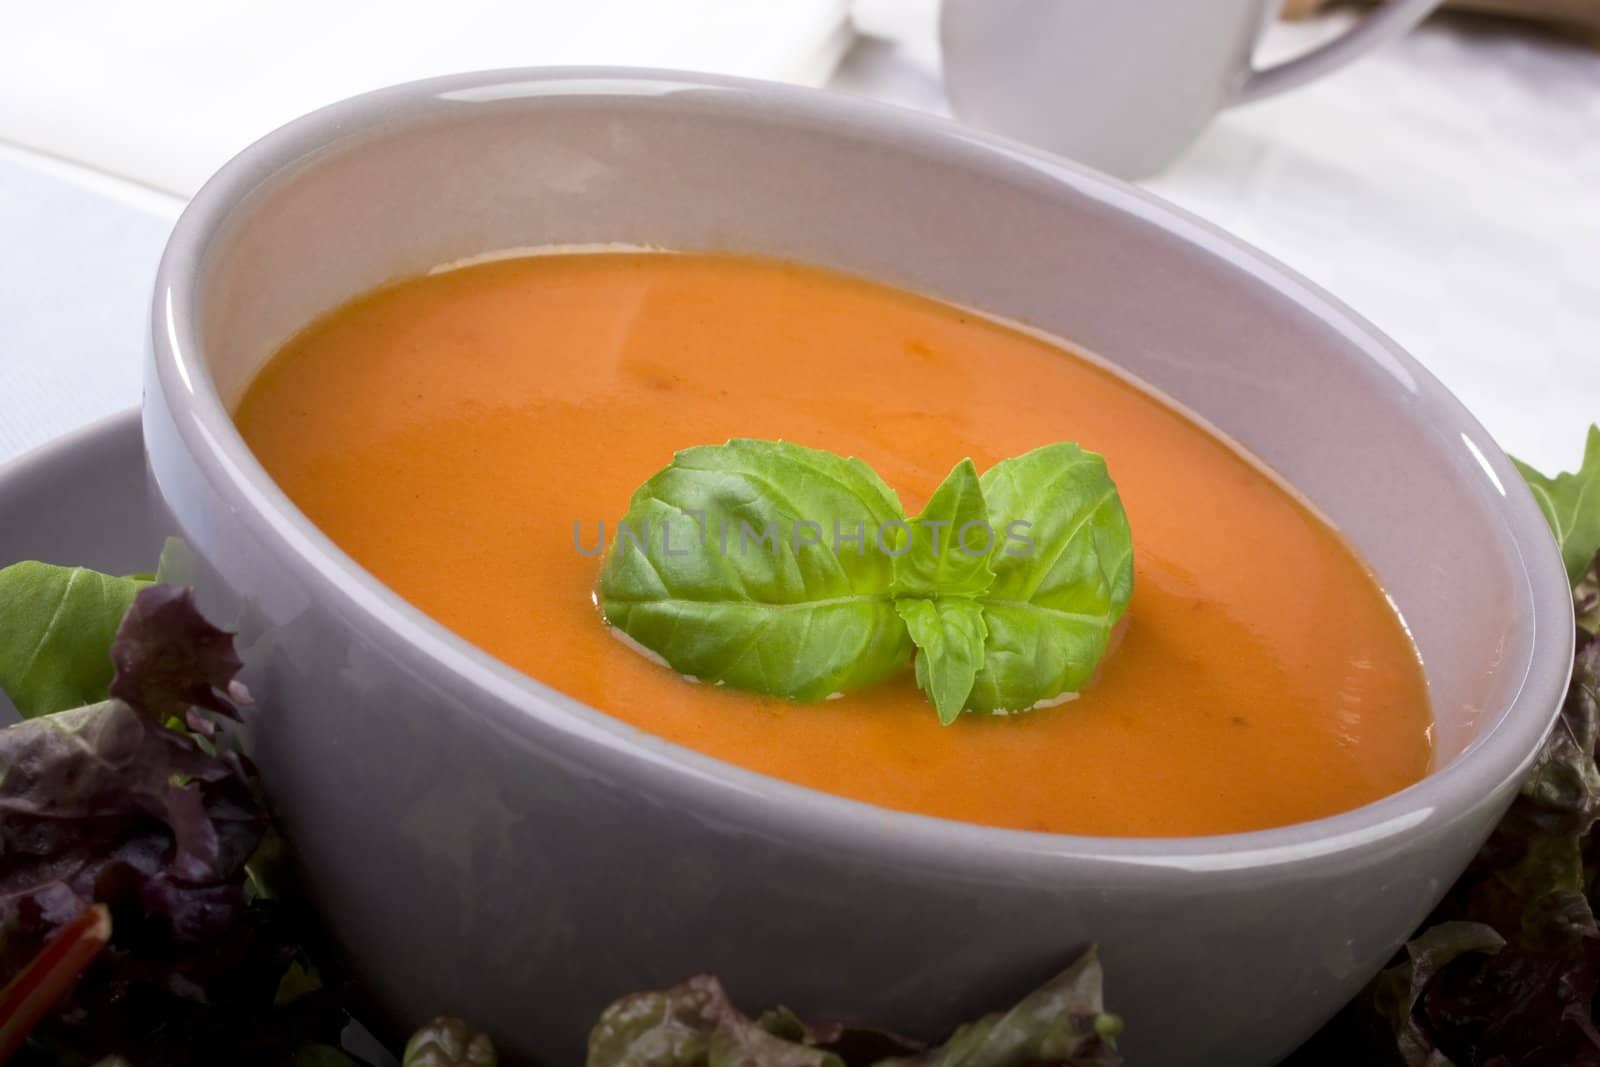 Enticing tomato soup with basil leaves as garnish.  Great lunch for the dieter.  